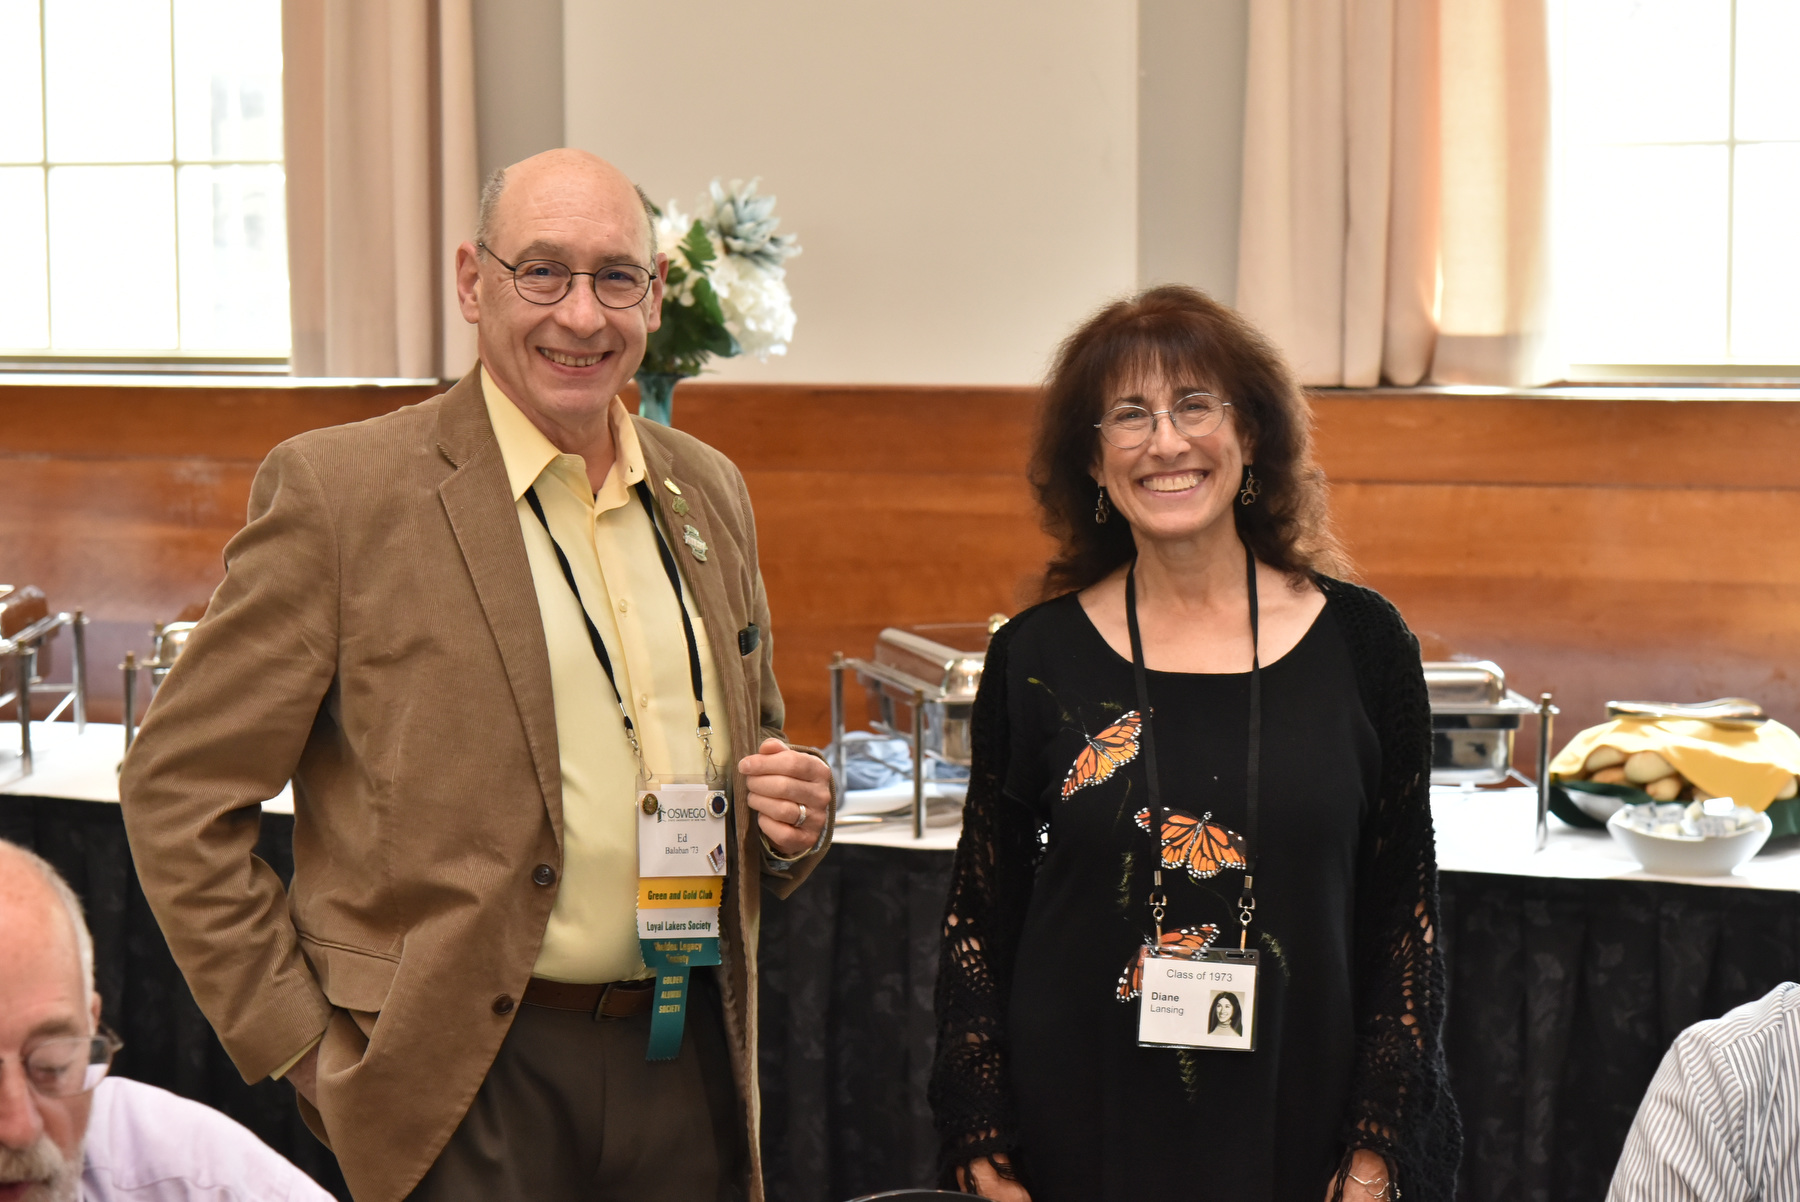 The Reunion Weekend's reception and luncheon for alumni from the Class of 1973 and prior, held in Sheldon Hall ballroom, provided classmates with the chance to catch up. Pictured are 1973 classmates Ed Balaban and Diane Lansing.